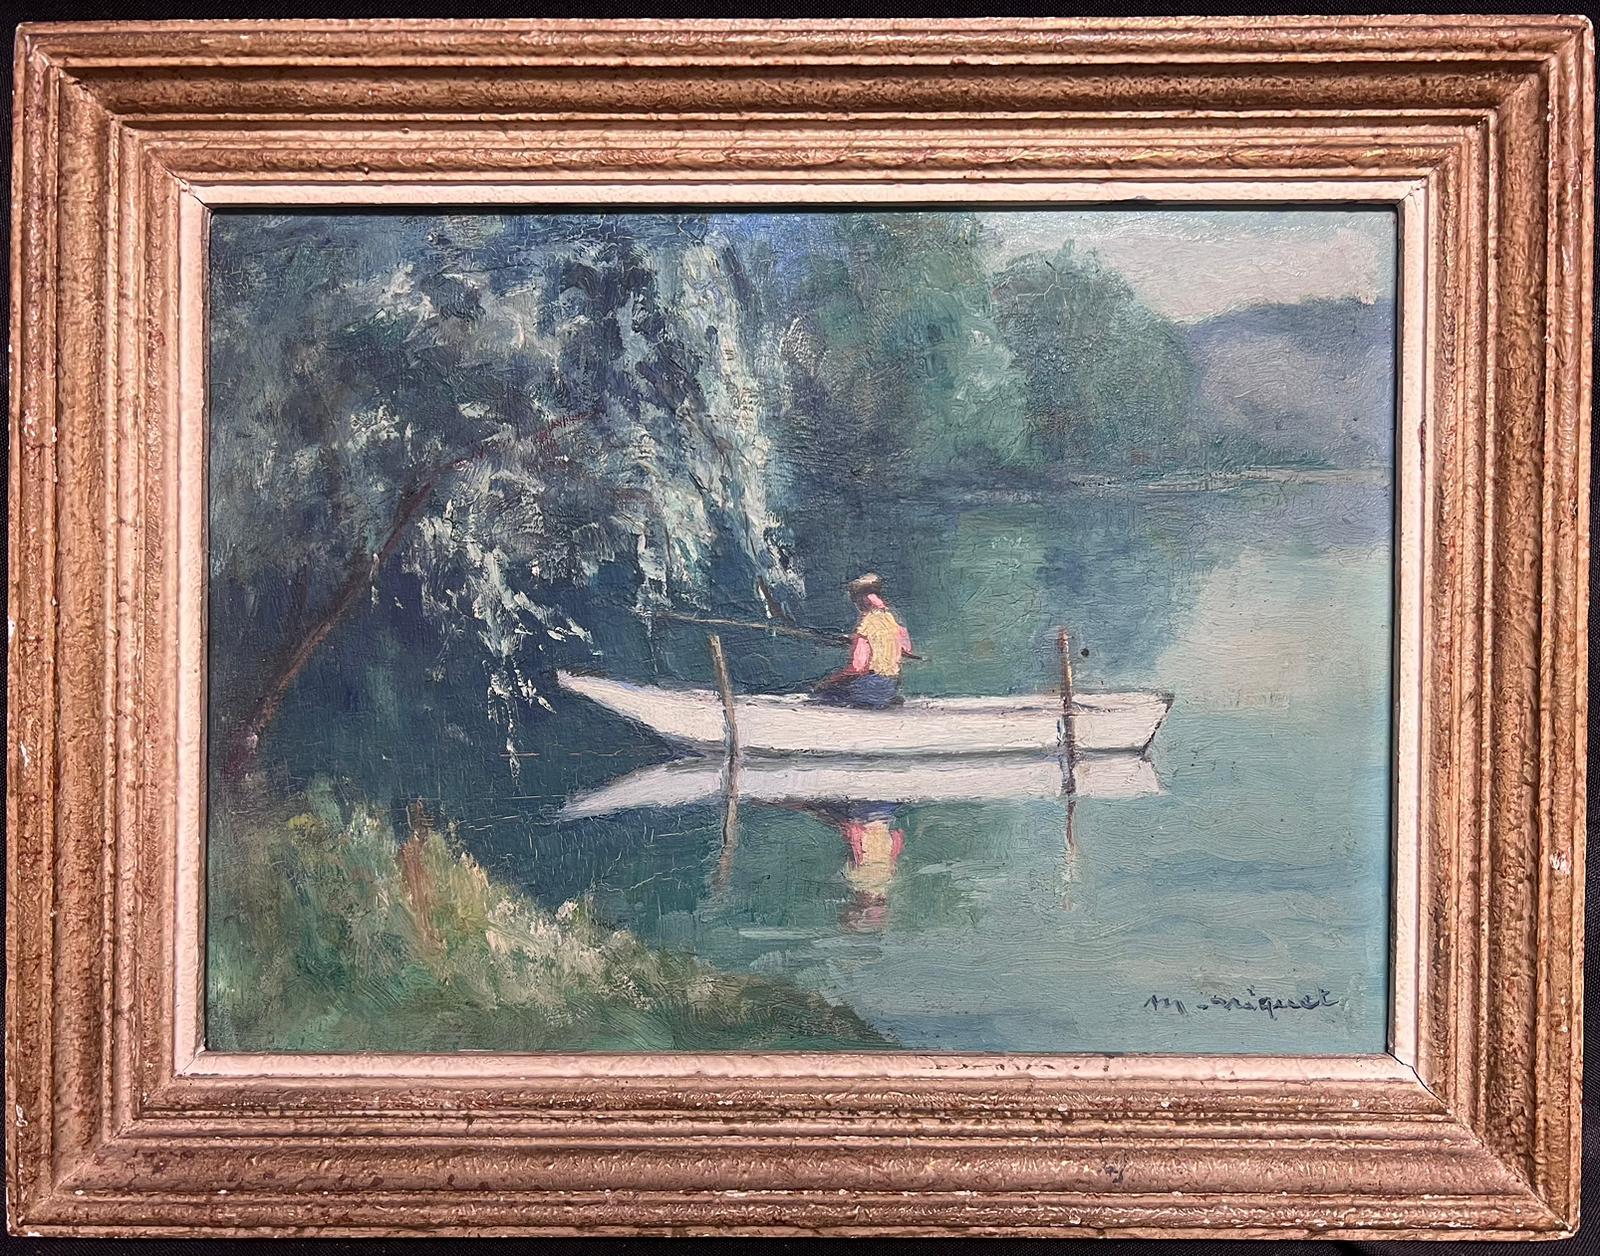 Marcel Niquet Figurative Painting - Mid 20th Century French Post-Impressionist Signed Oil Angler in Boat on River